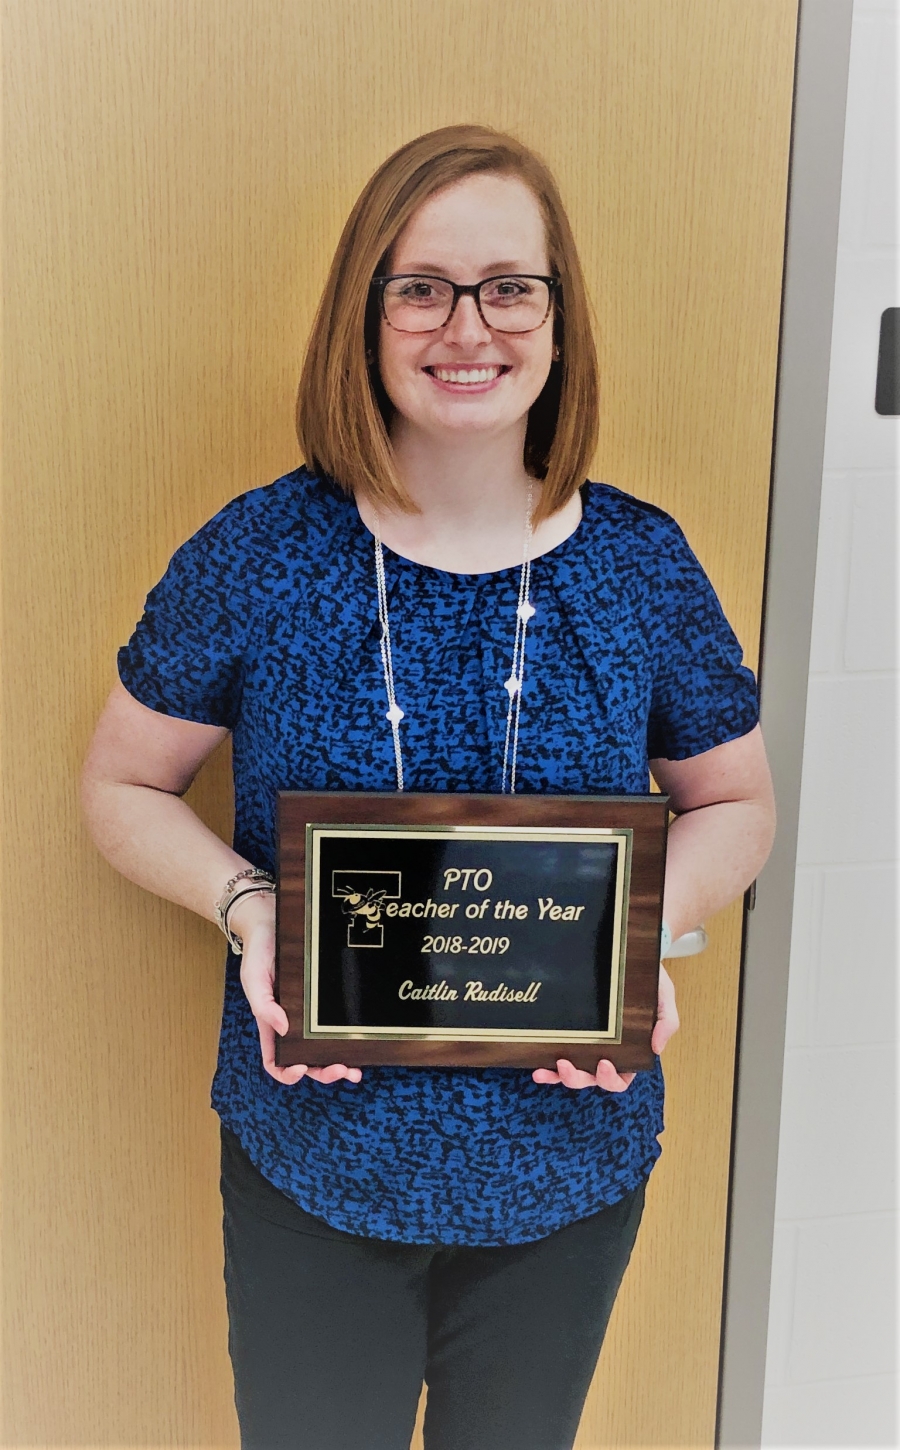 Caitlin Rudisell receives Educator of the Year Award from the PTO